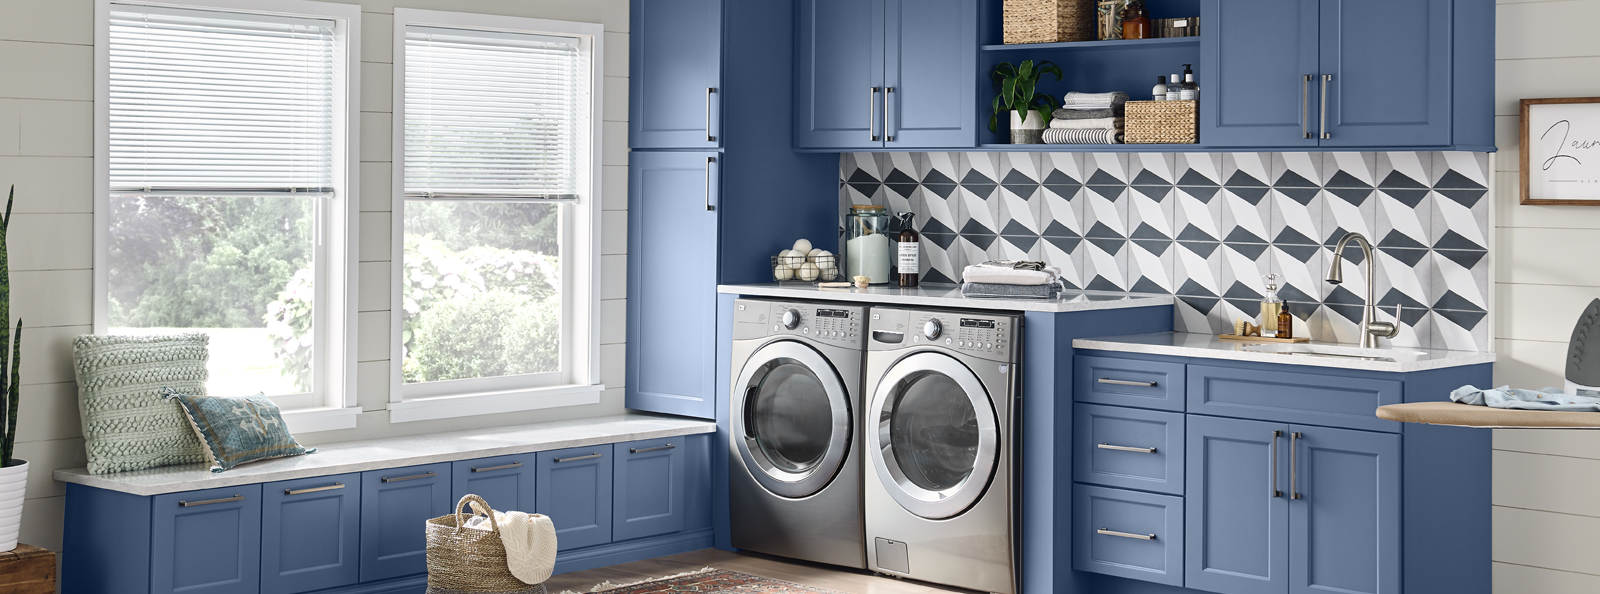 10 Best Laundry Room Shelving Ideas for Optimized Storage